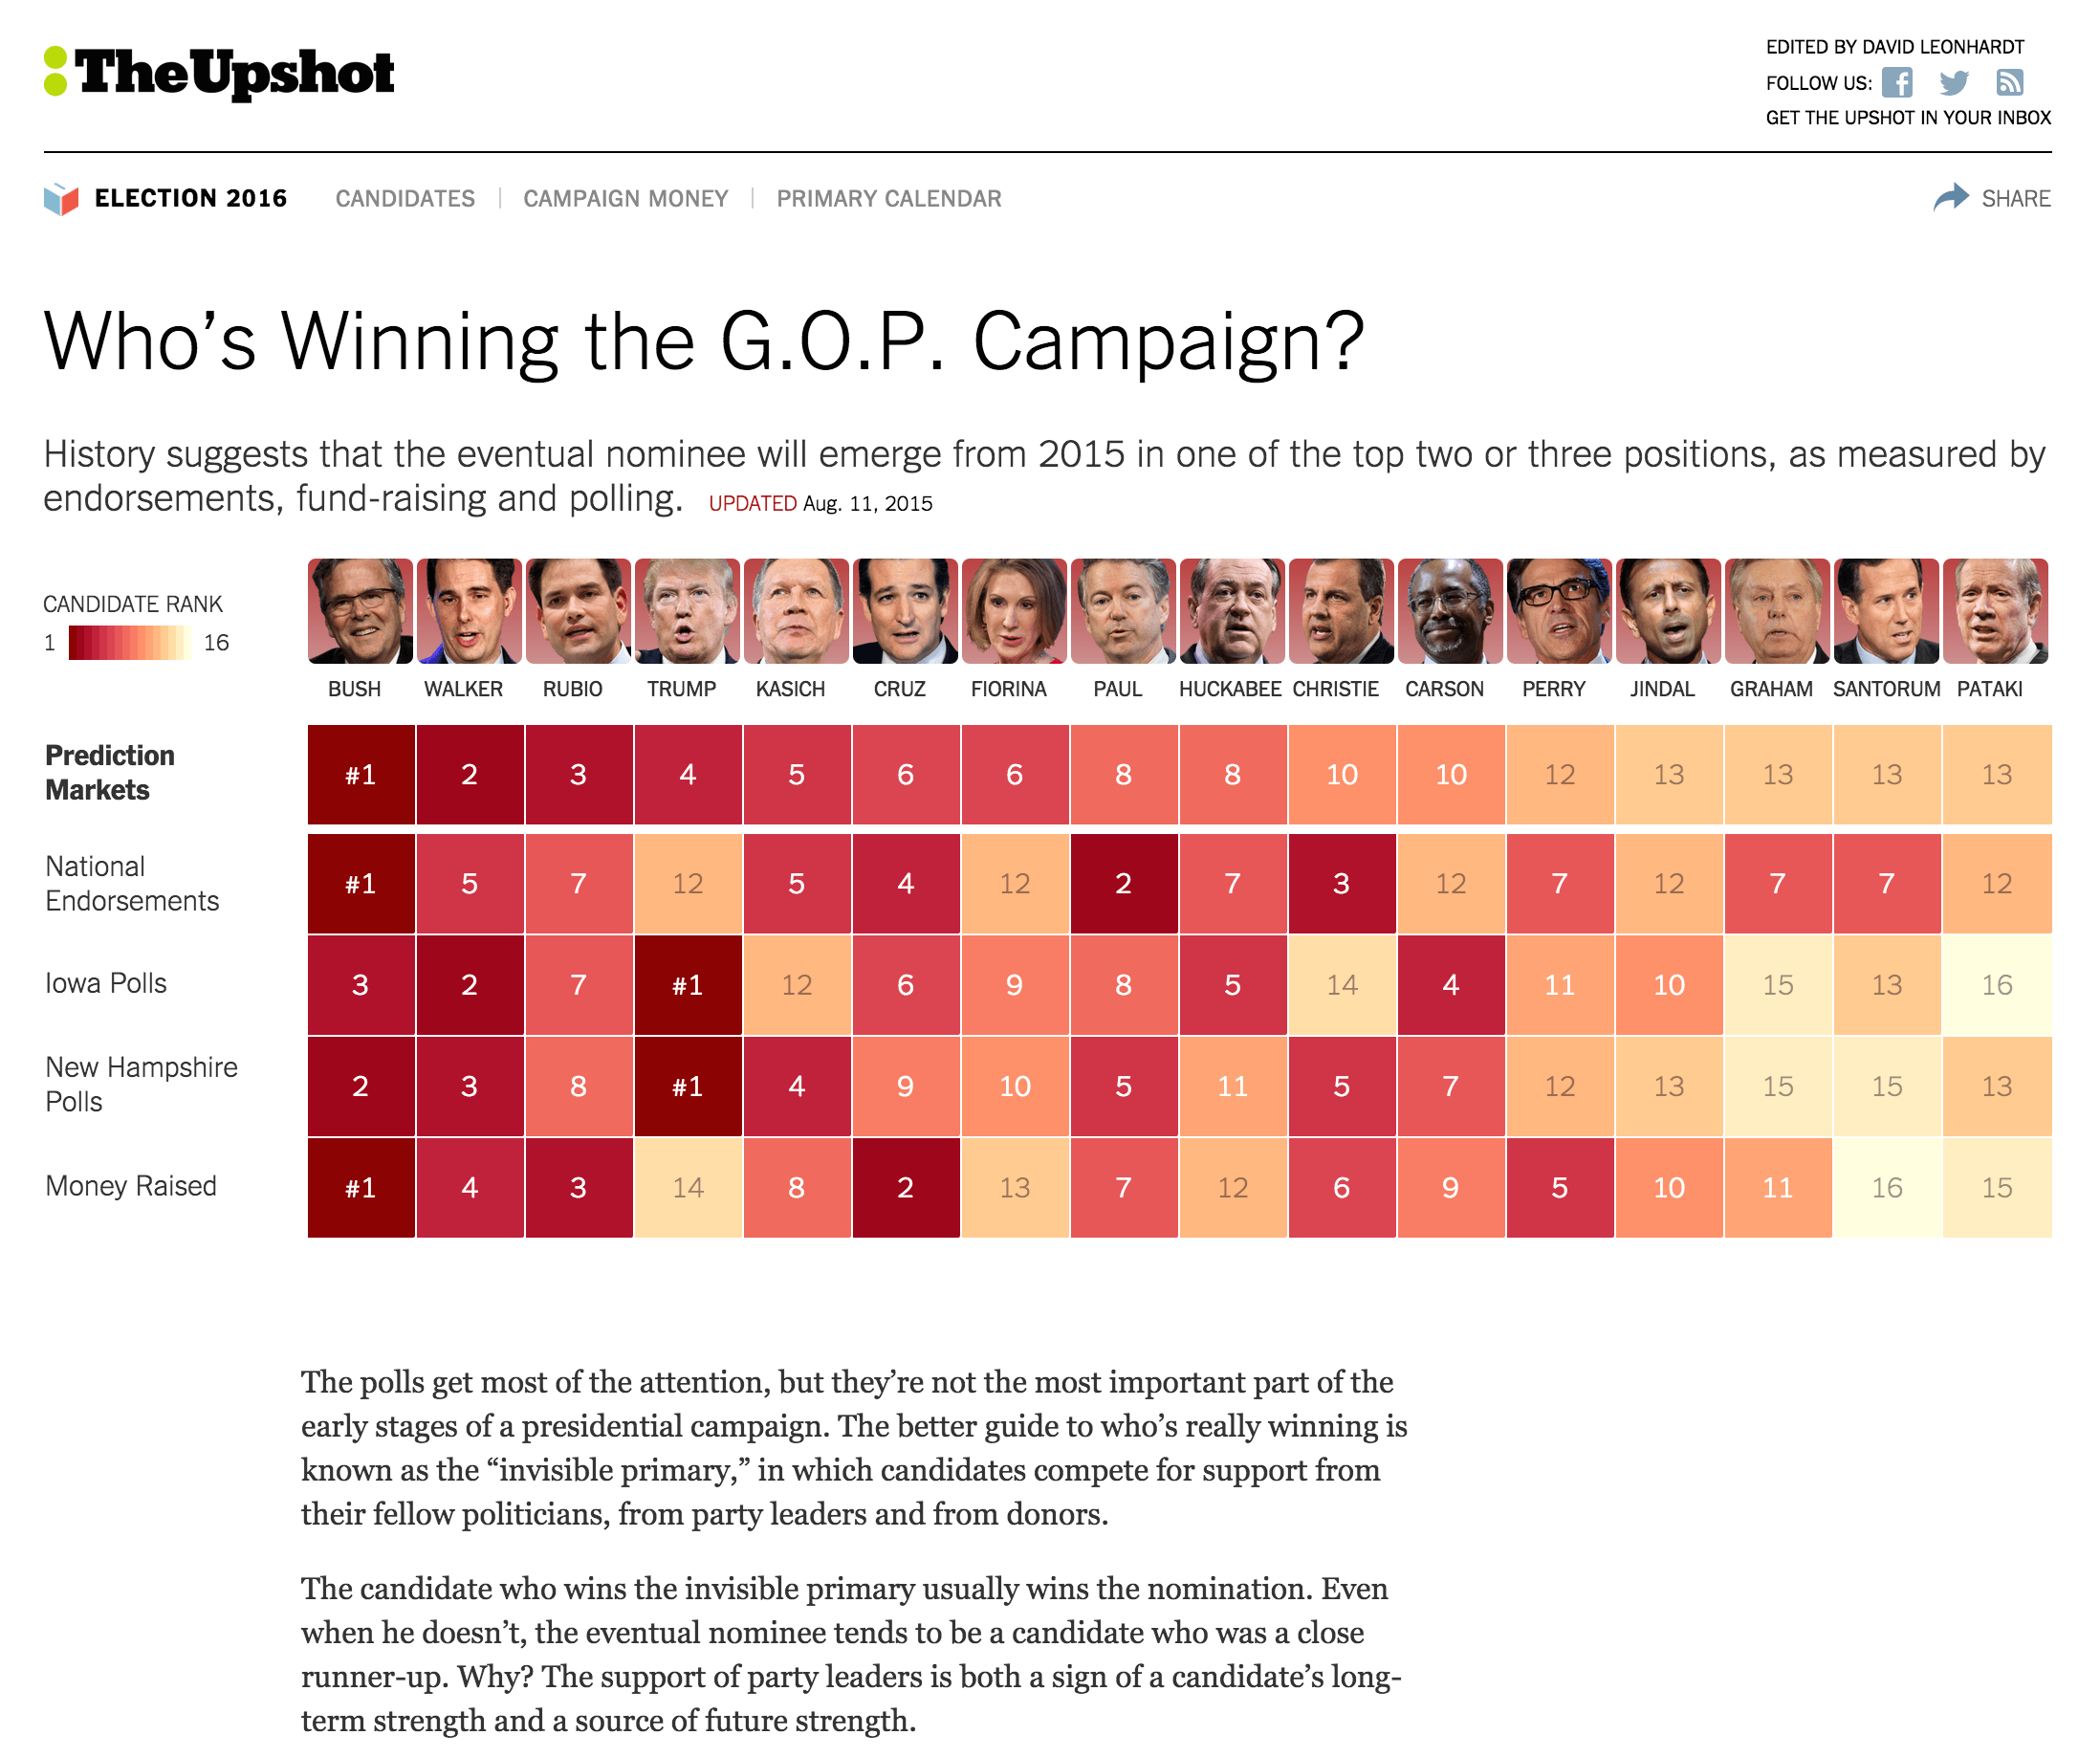 Who’s Winning the G.O.P. Campaign?